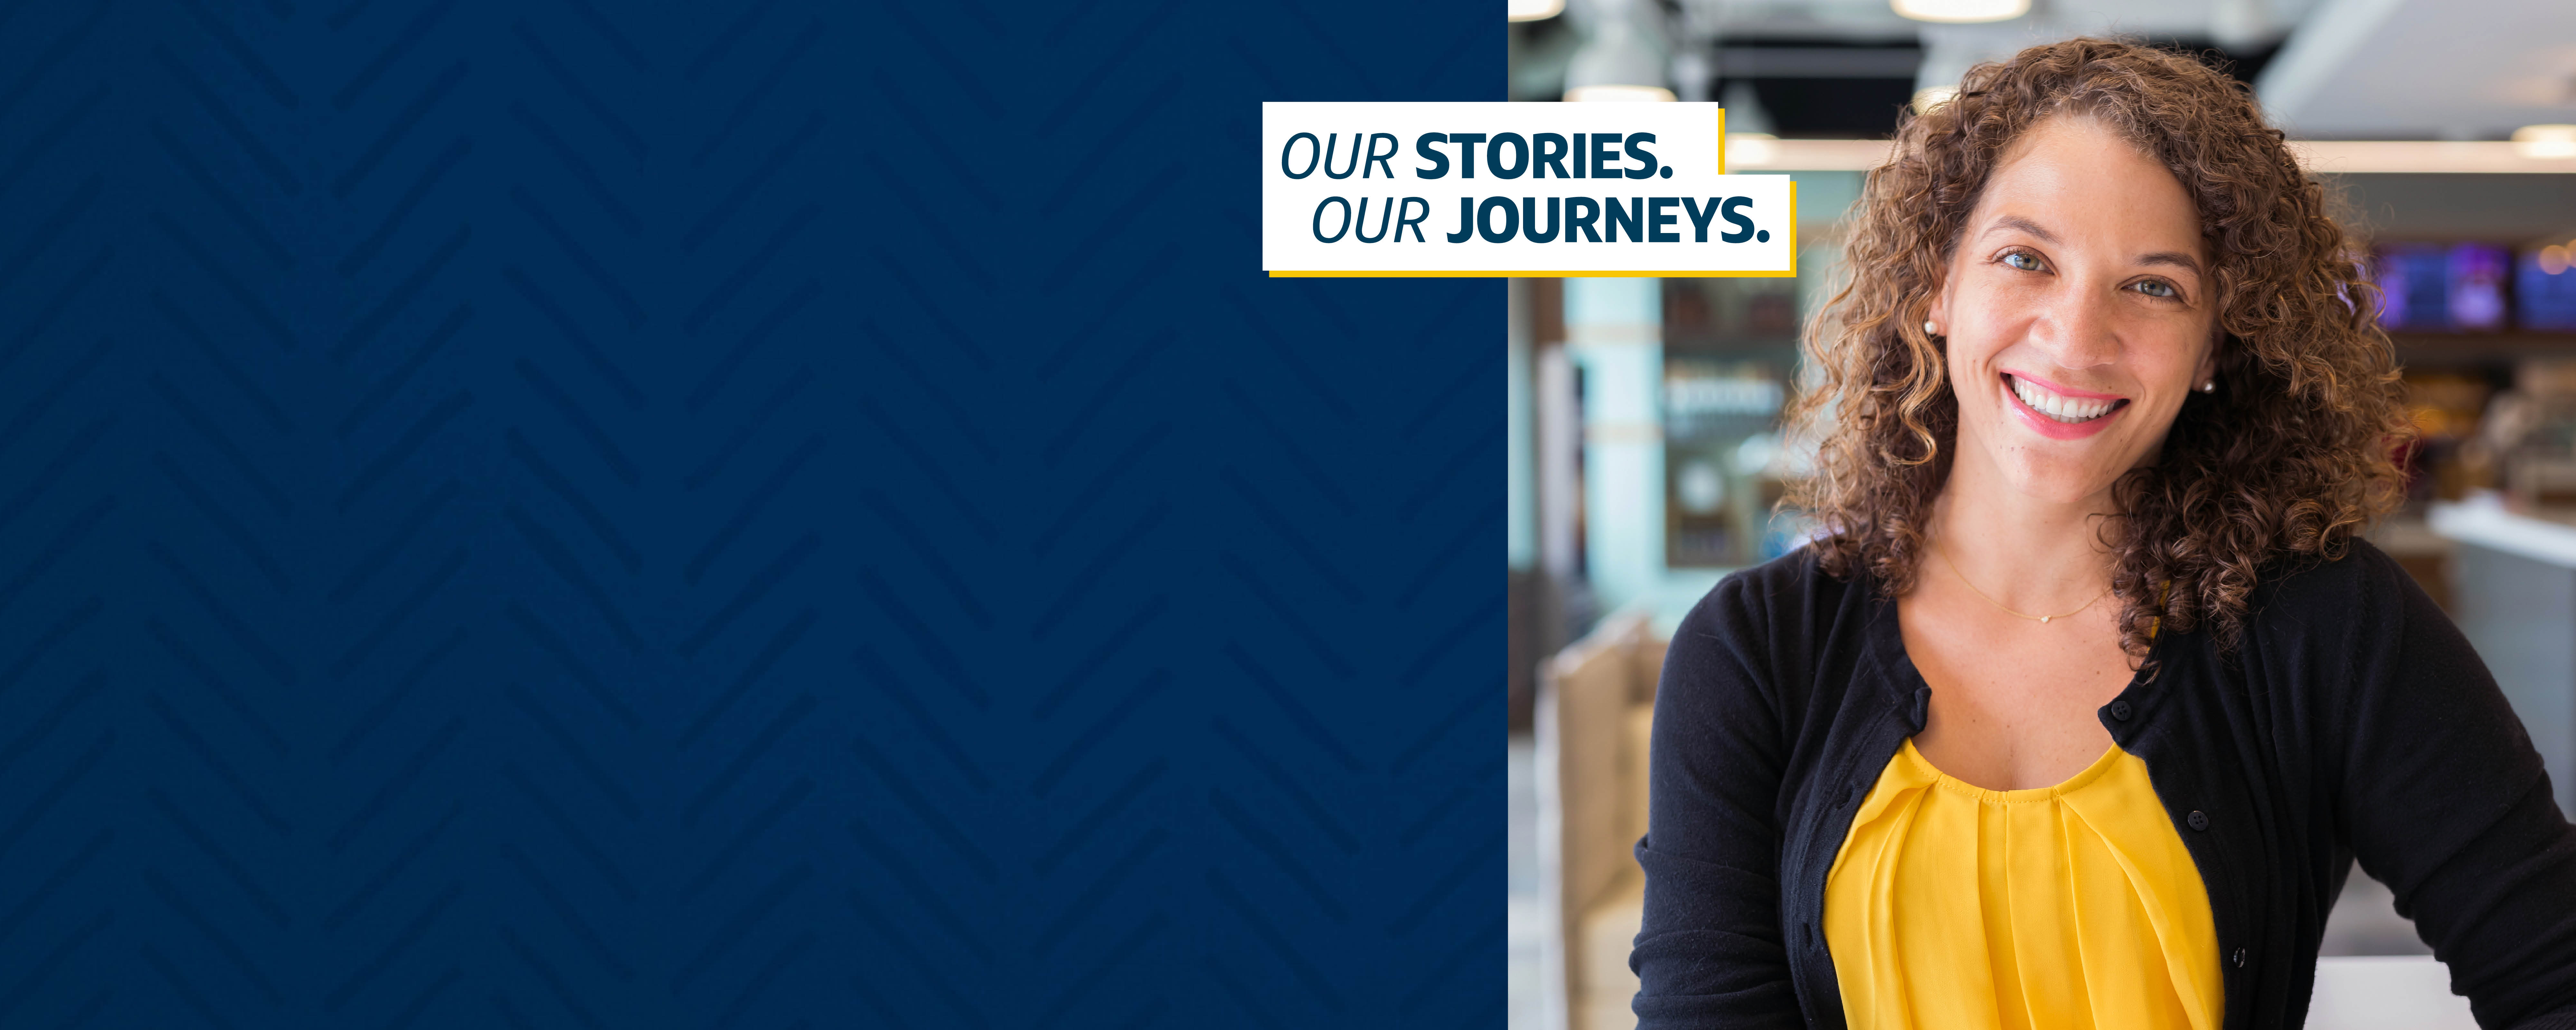 Capital One associate Elesah stands and smiles, leaning against a surface. The words, "Our Stories, Our Journeys" are in the center of the page, with her picture next to a dark blue background 